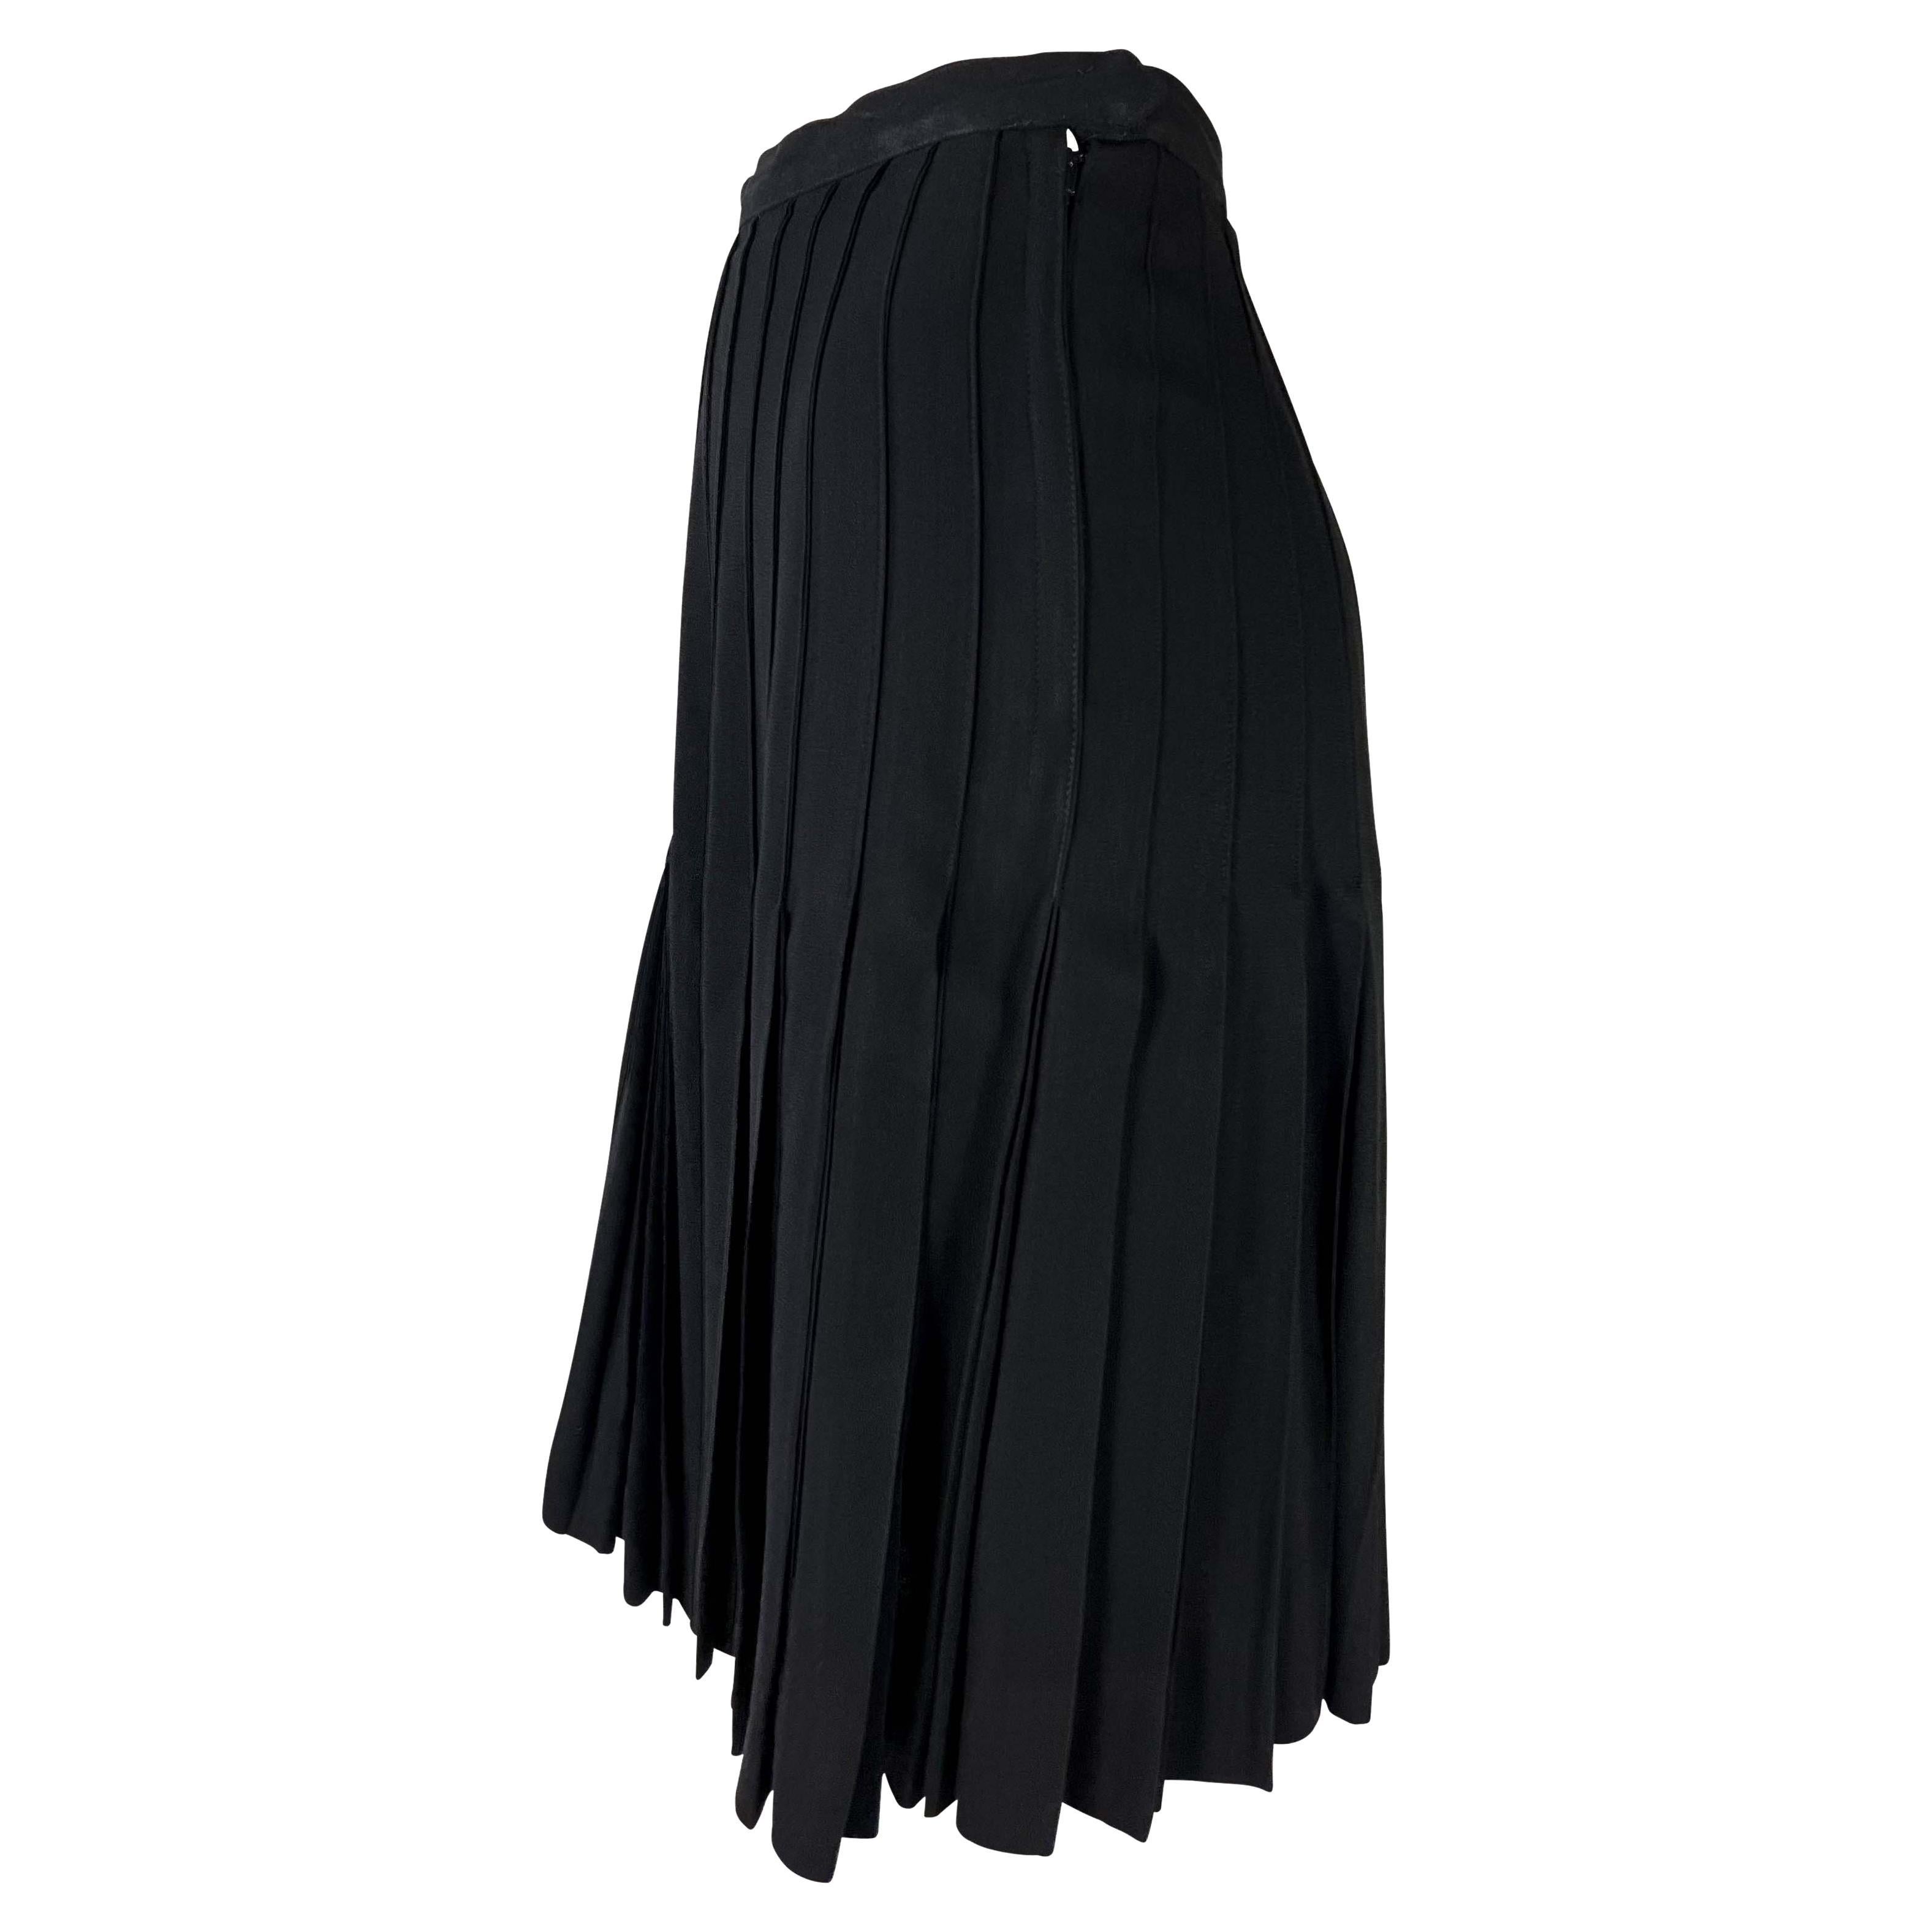 1980s Saint Laurent Rive Gauche Accordion Pleated Black Flare Skirt In Good Condition For Sale In West Hollywood, CA